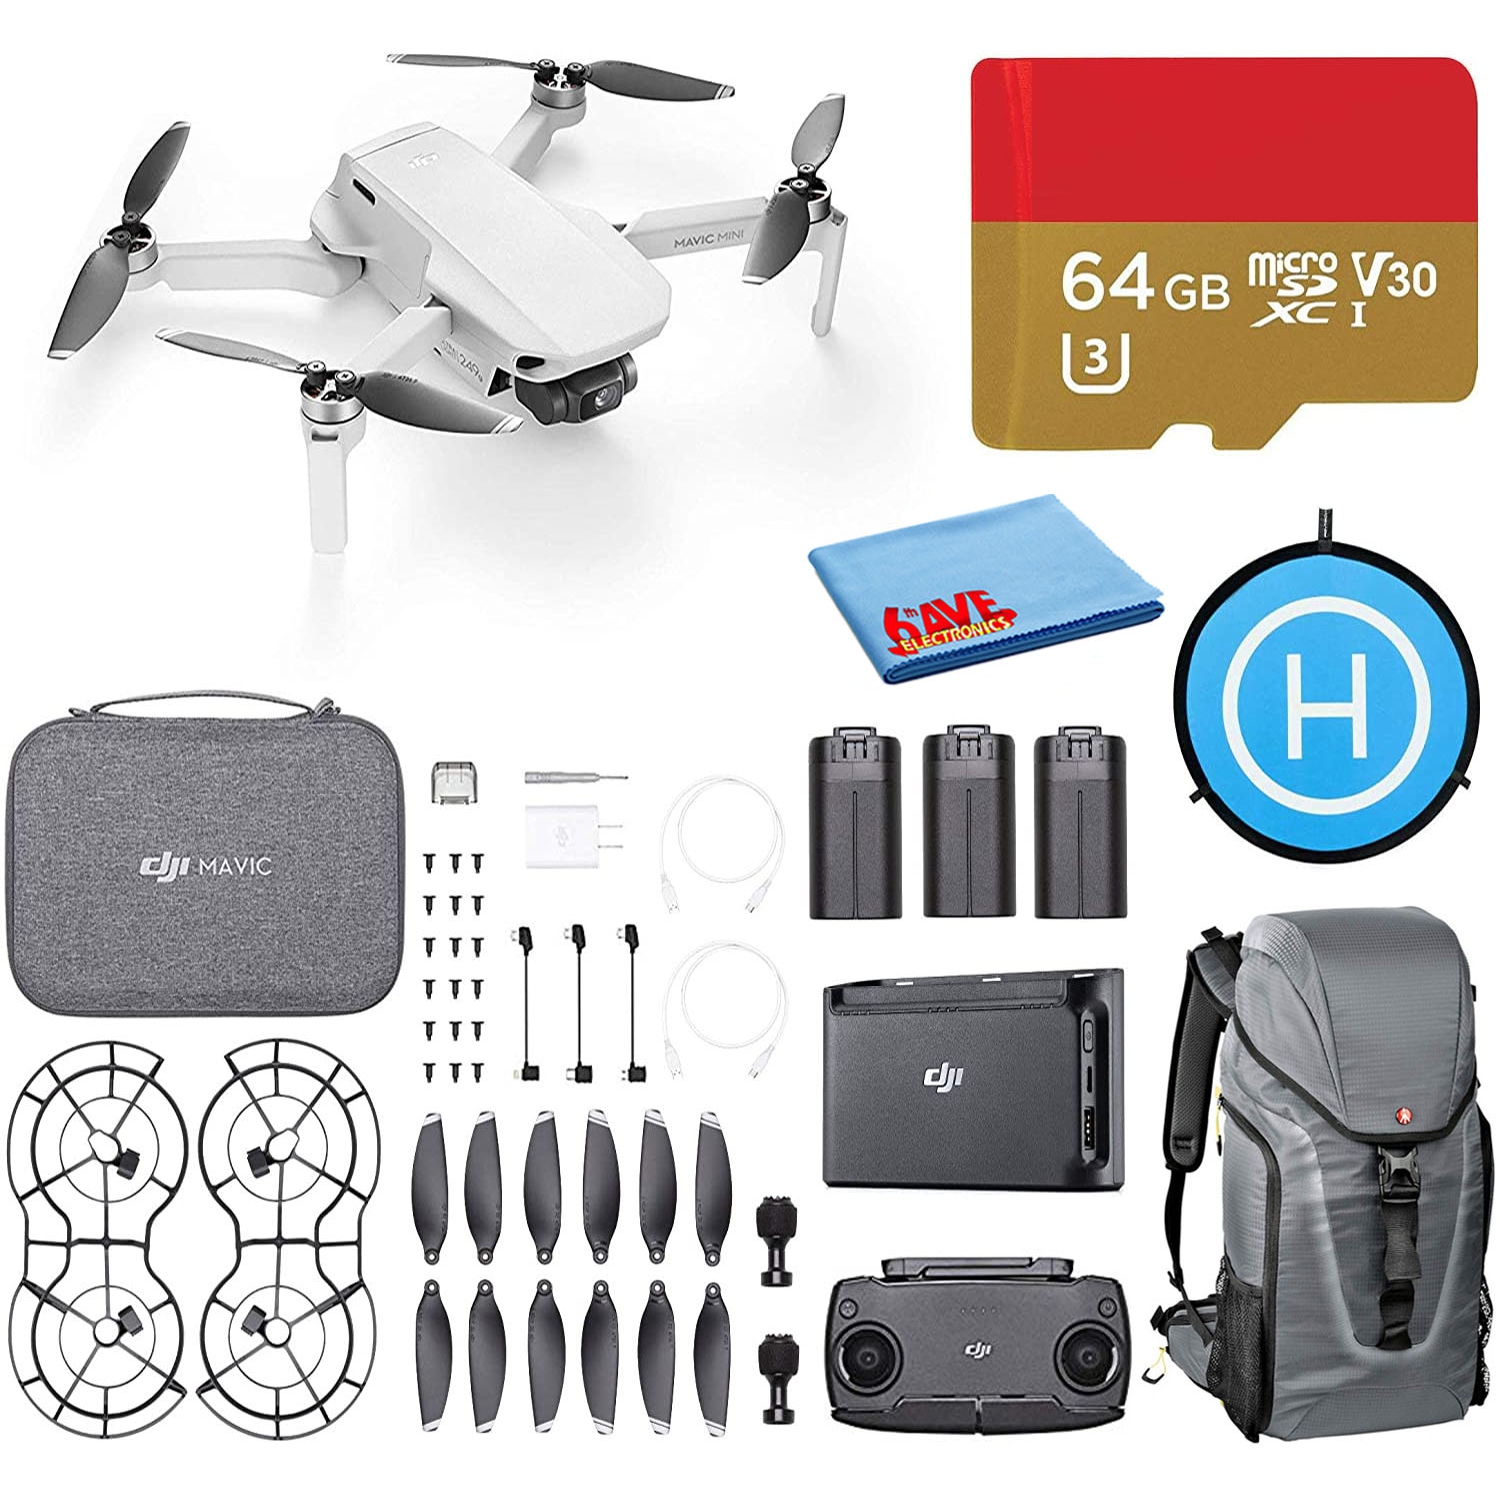 DJI Mavic Mini Fly More Combo Drone Quadcopter Bundle with Backpack, 64GB Card